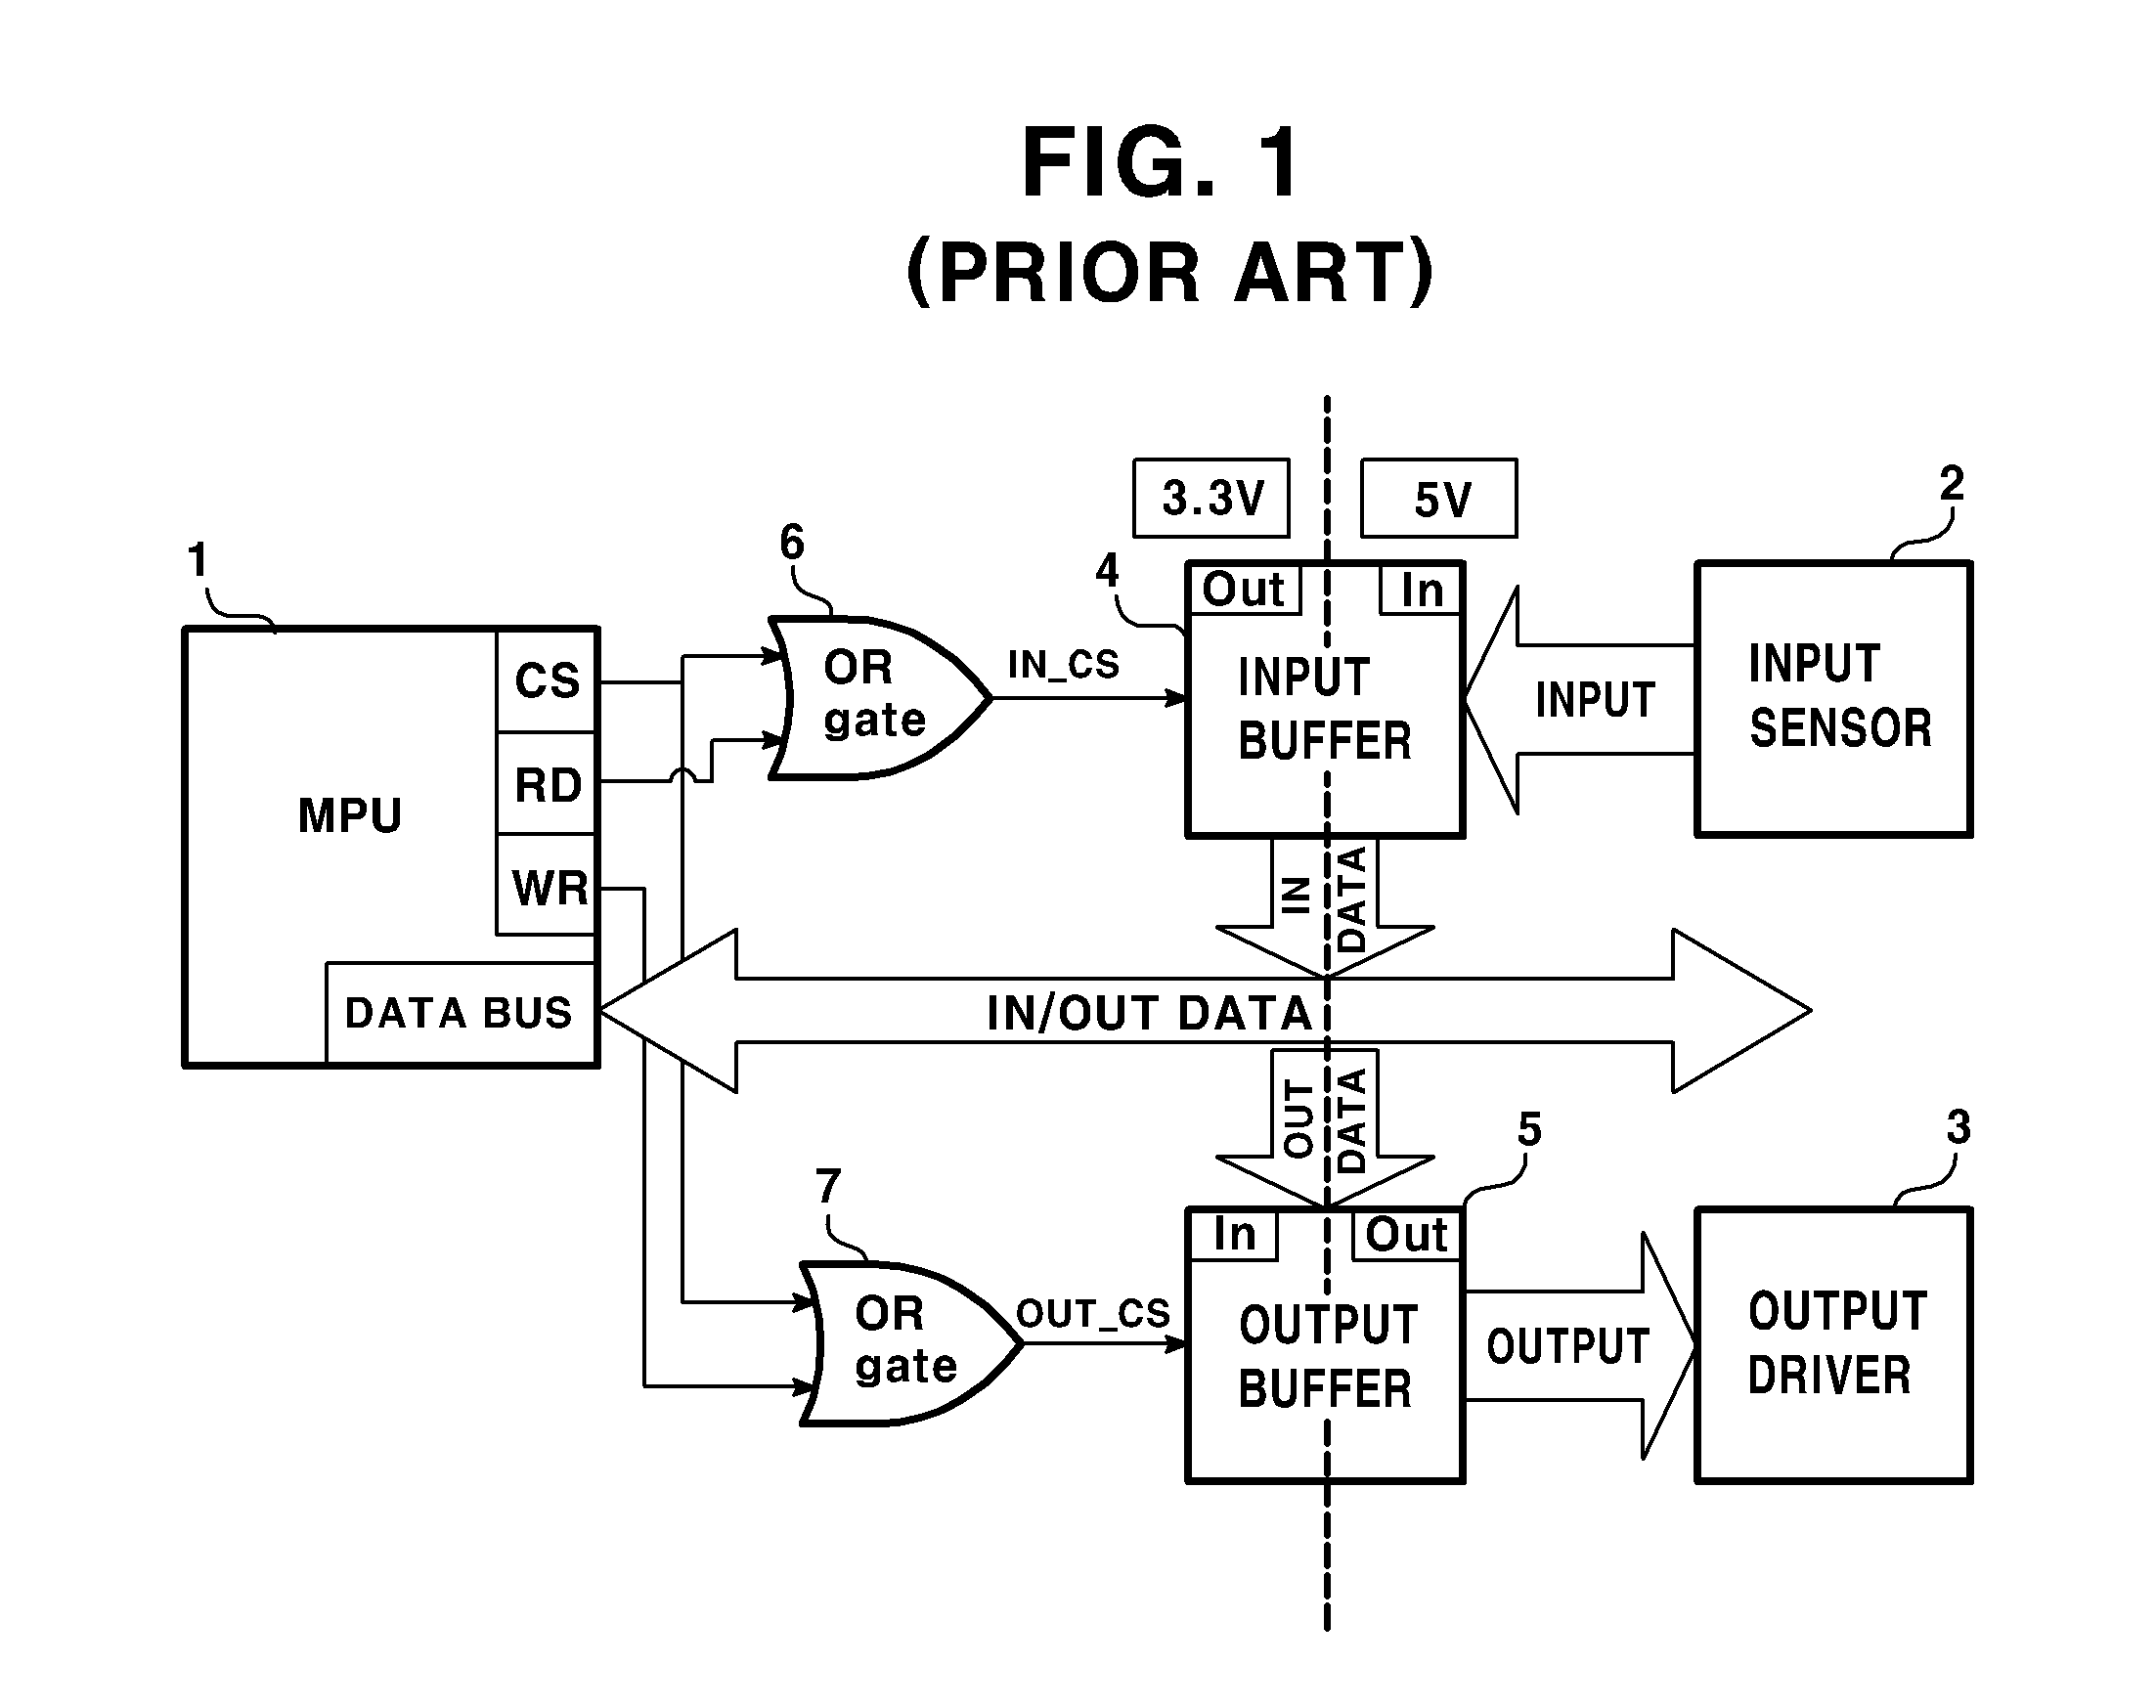 Method for transmitting and receiving data between MPU and memory in PLC